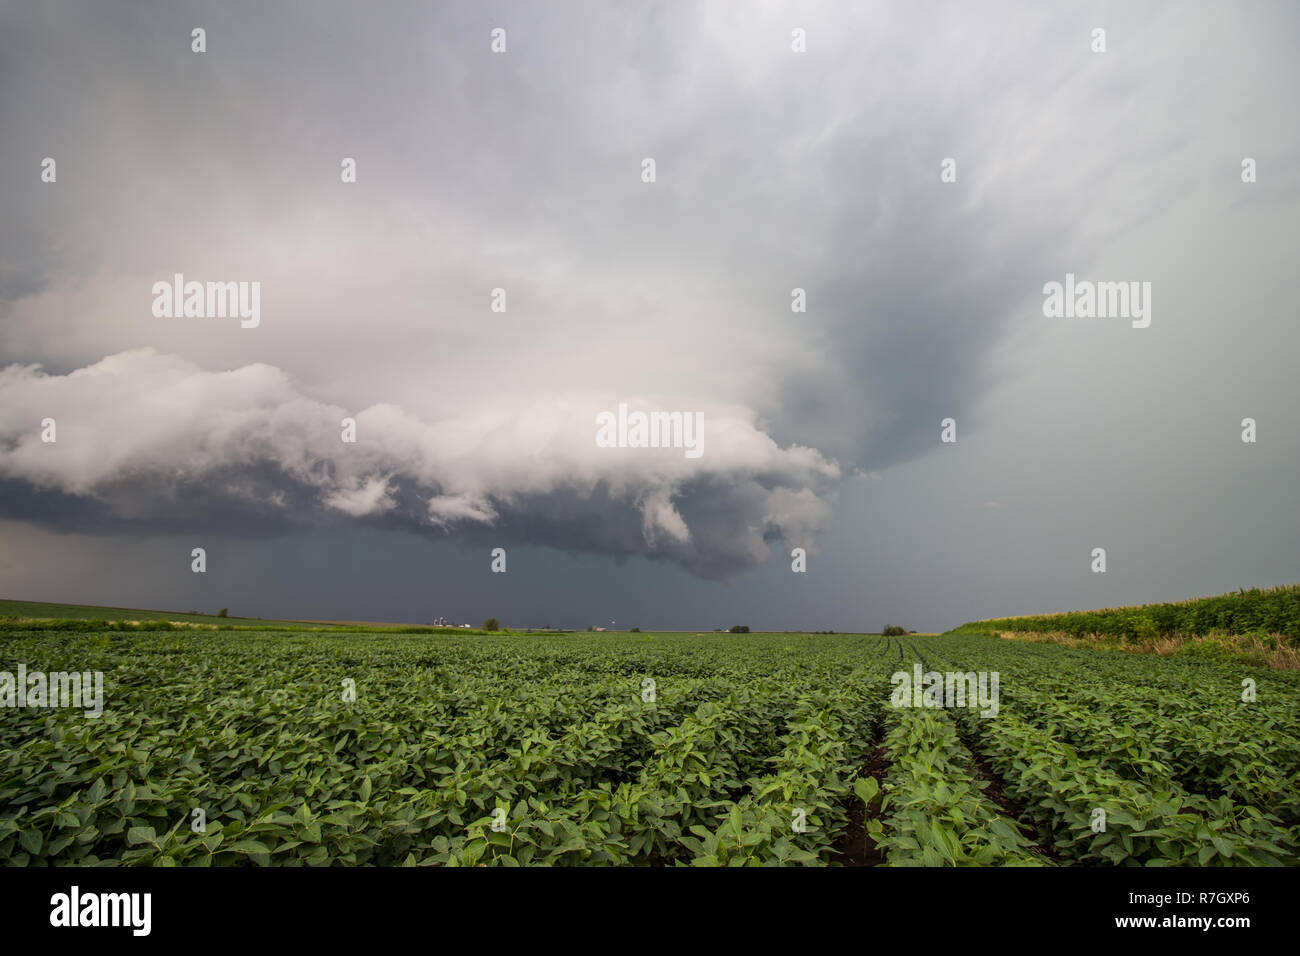 A ragged storm cloud hovers over soybean fields in the midwestern United States. Stock Photo